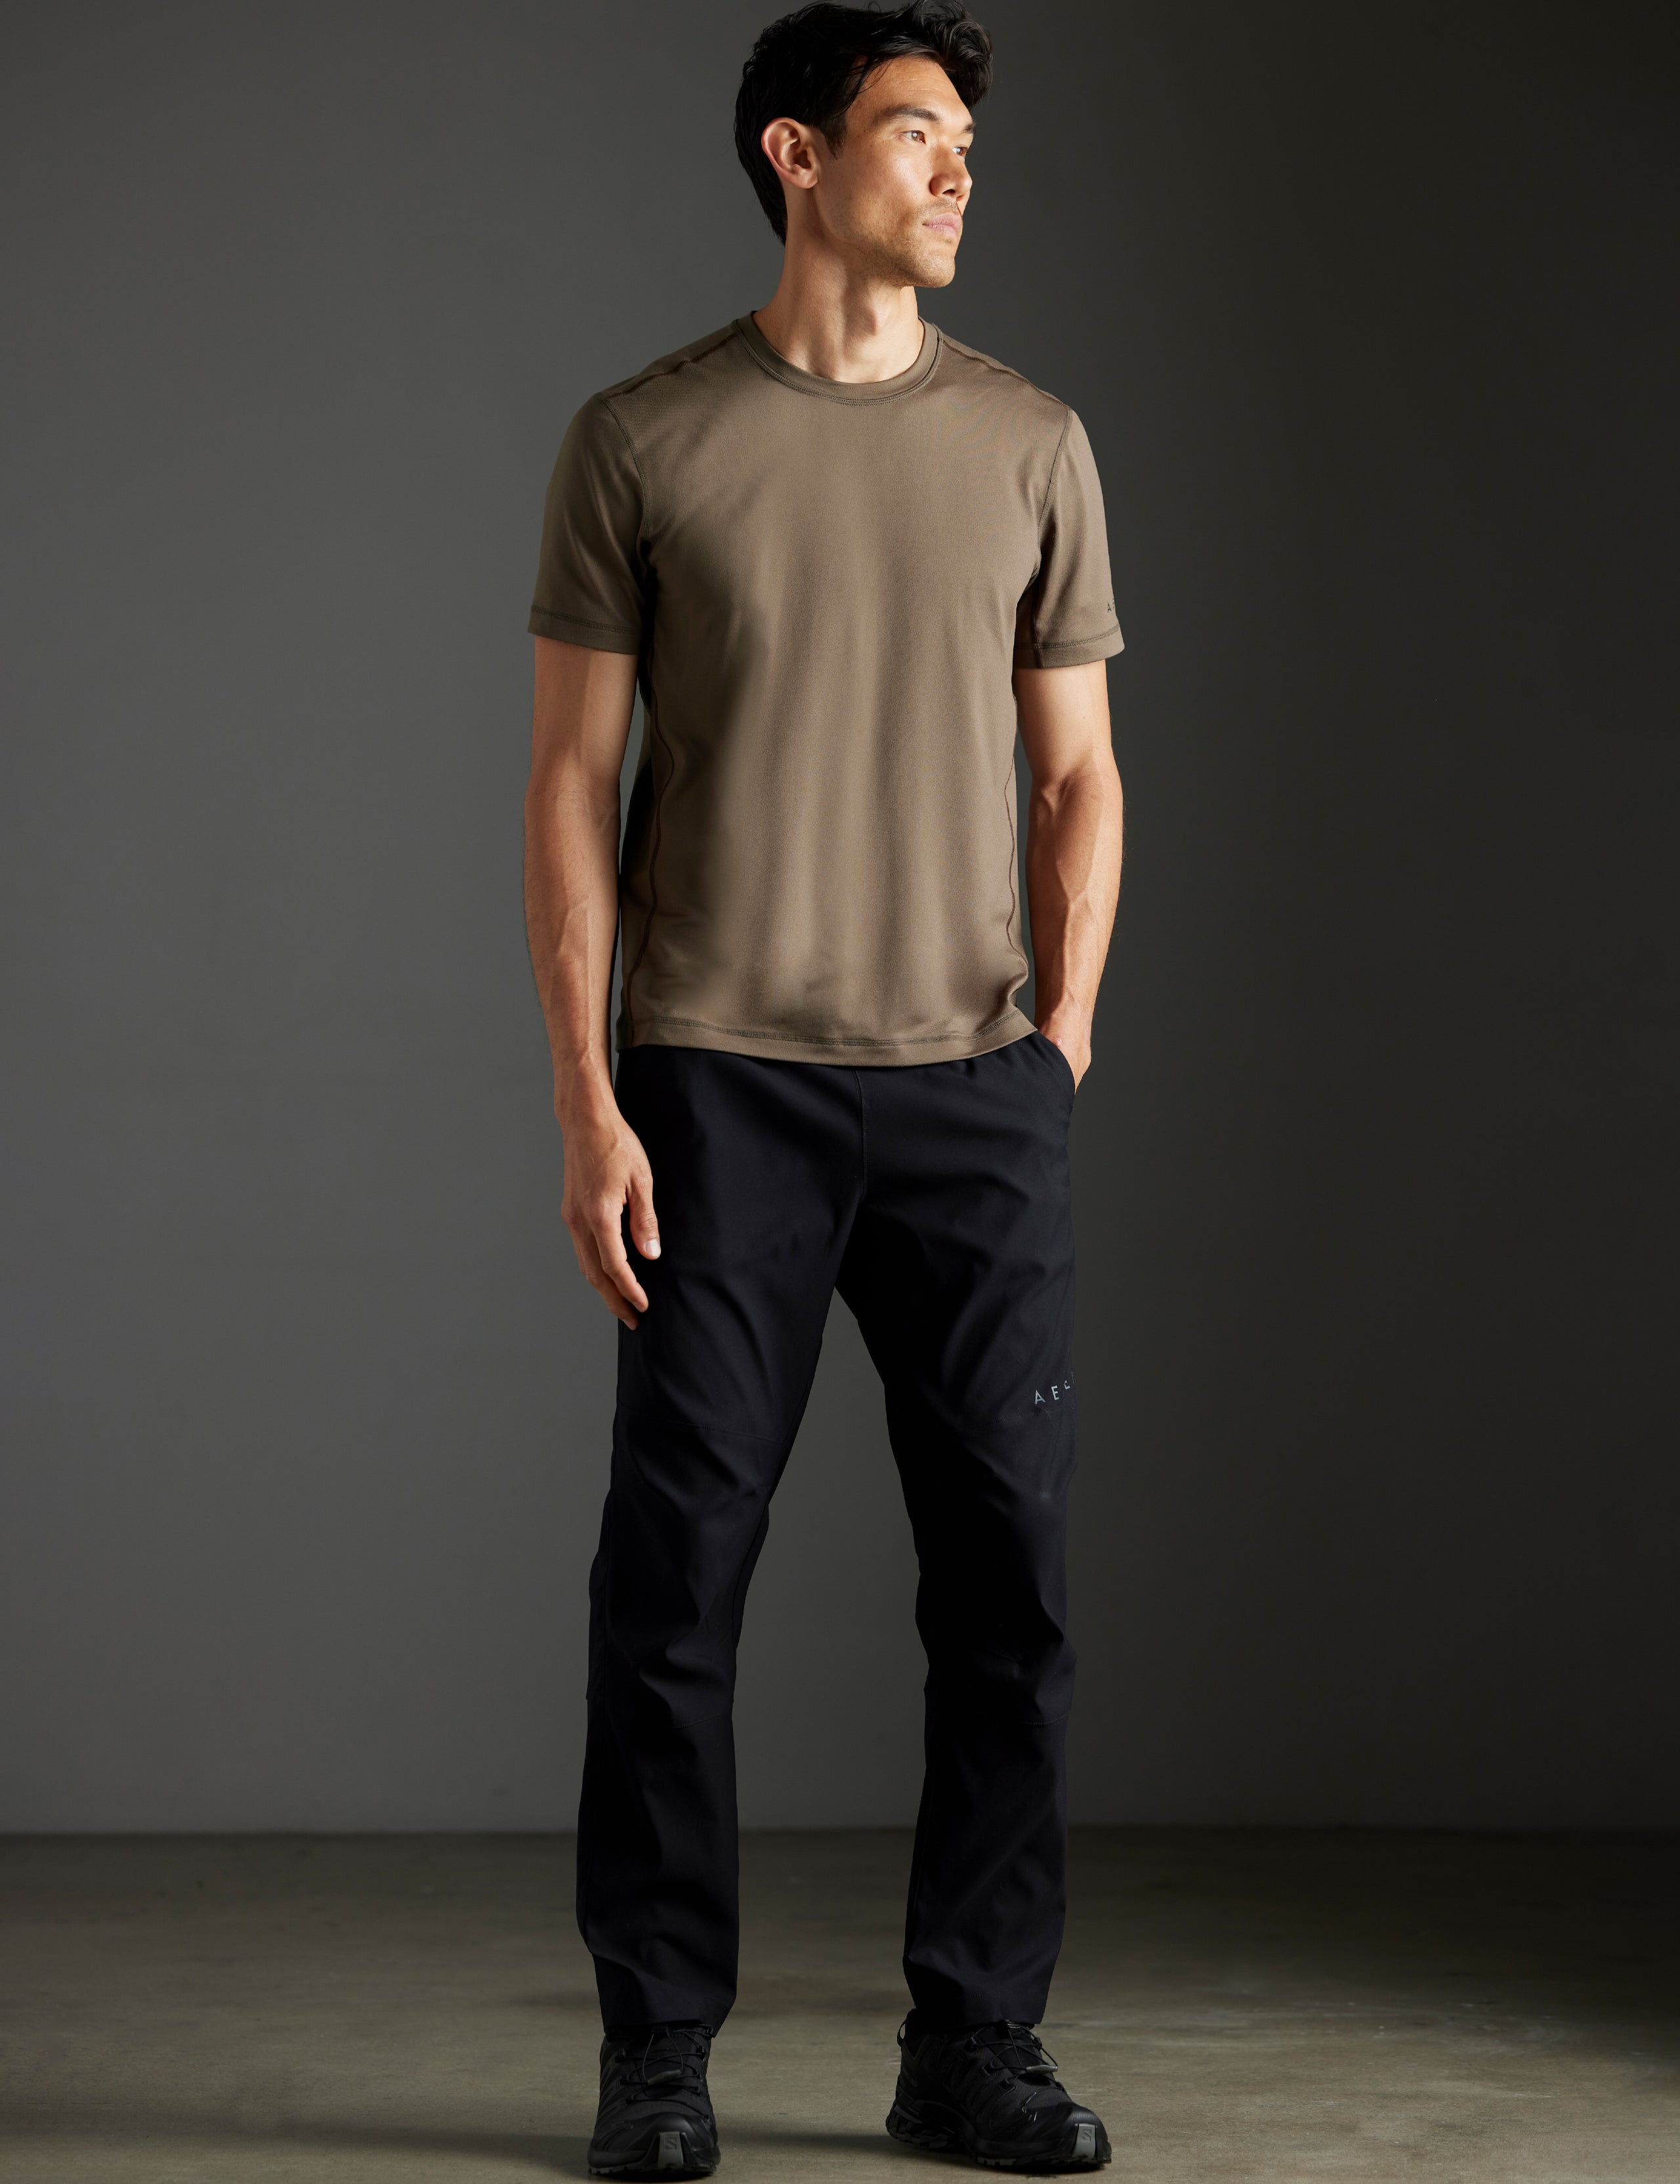 man wearing black pants from AETHER Apparel